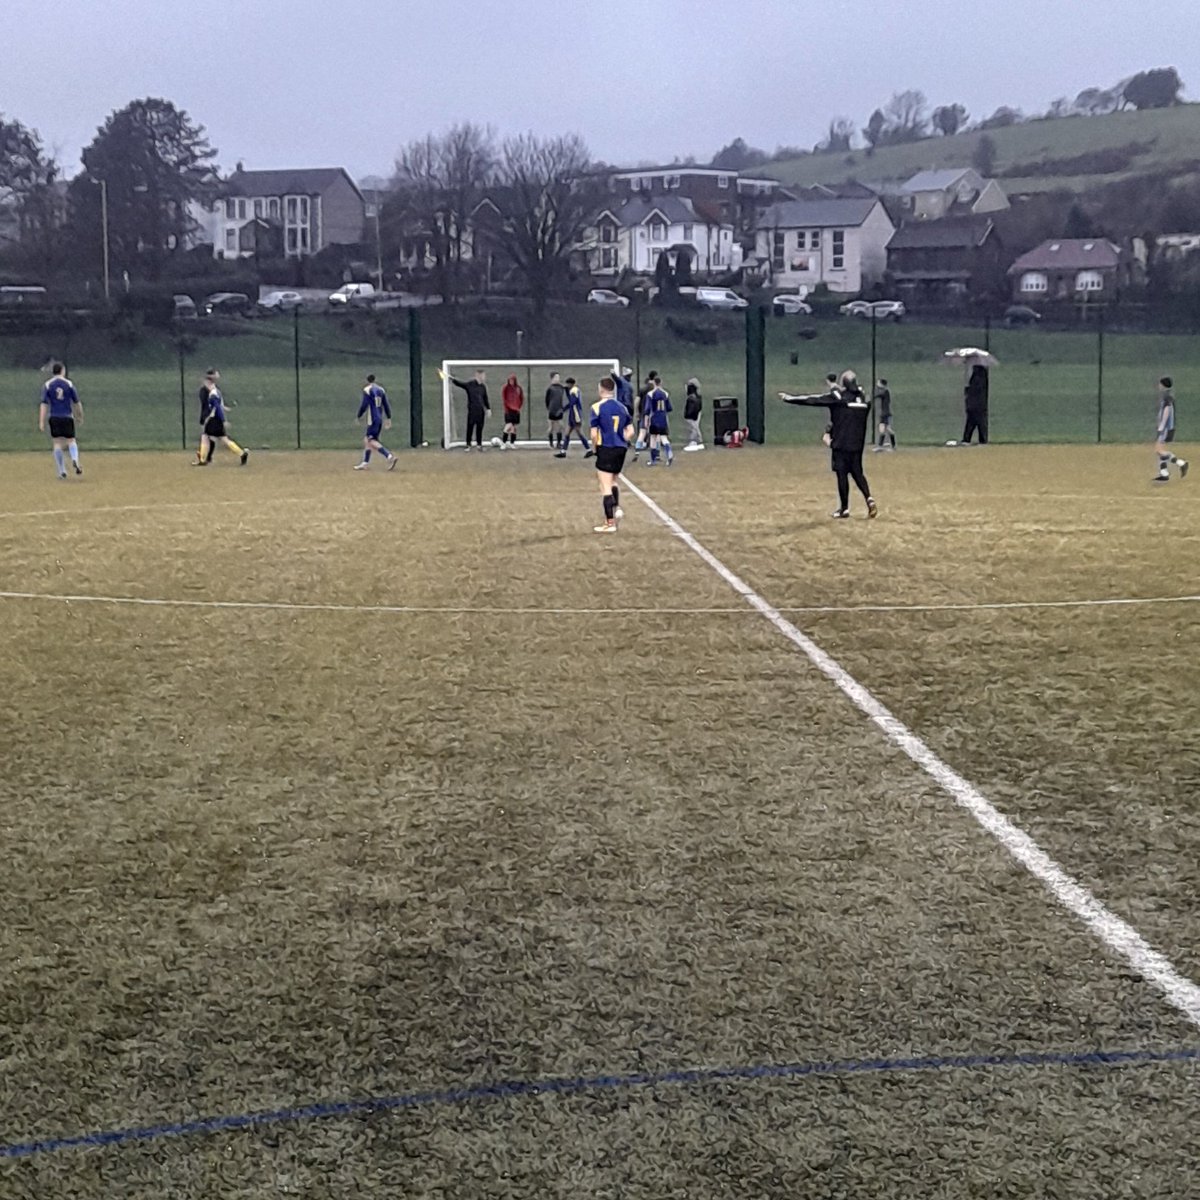 Congratulations to Yr 9, who beat Tonyrefail 3-1 on penalties after drawing 1-1 in full-time. This was another great advert for strength in depth in the RCT county, and credit goes to both sides. MOM: Jake Barclay-Davies (3 penalty saves in the shoot-out) Well done, gentlemen.